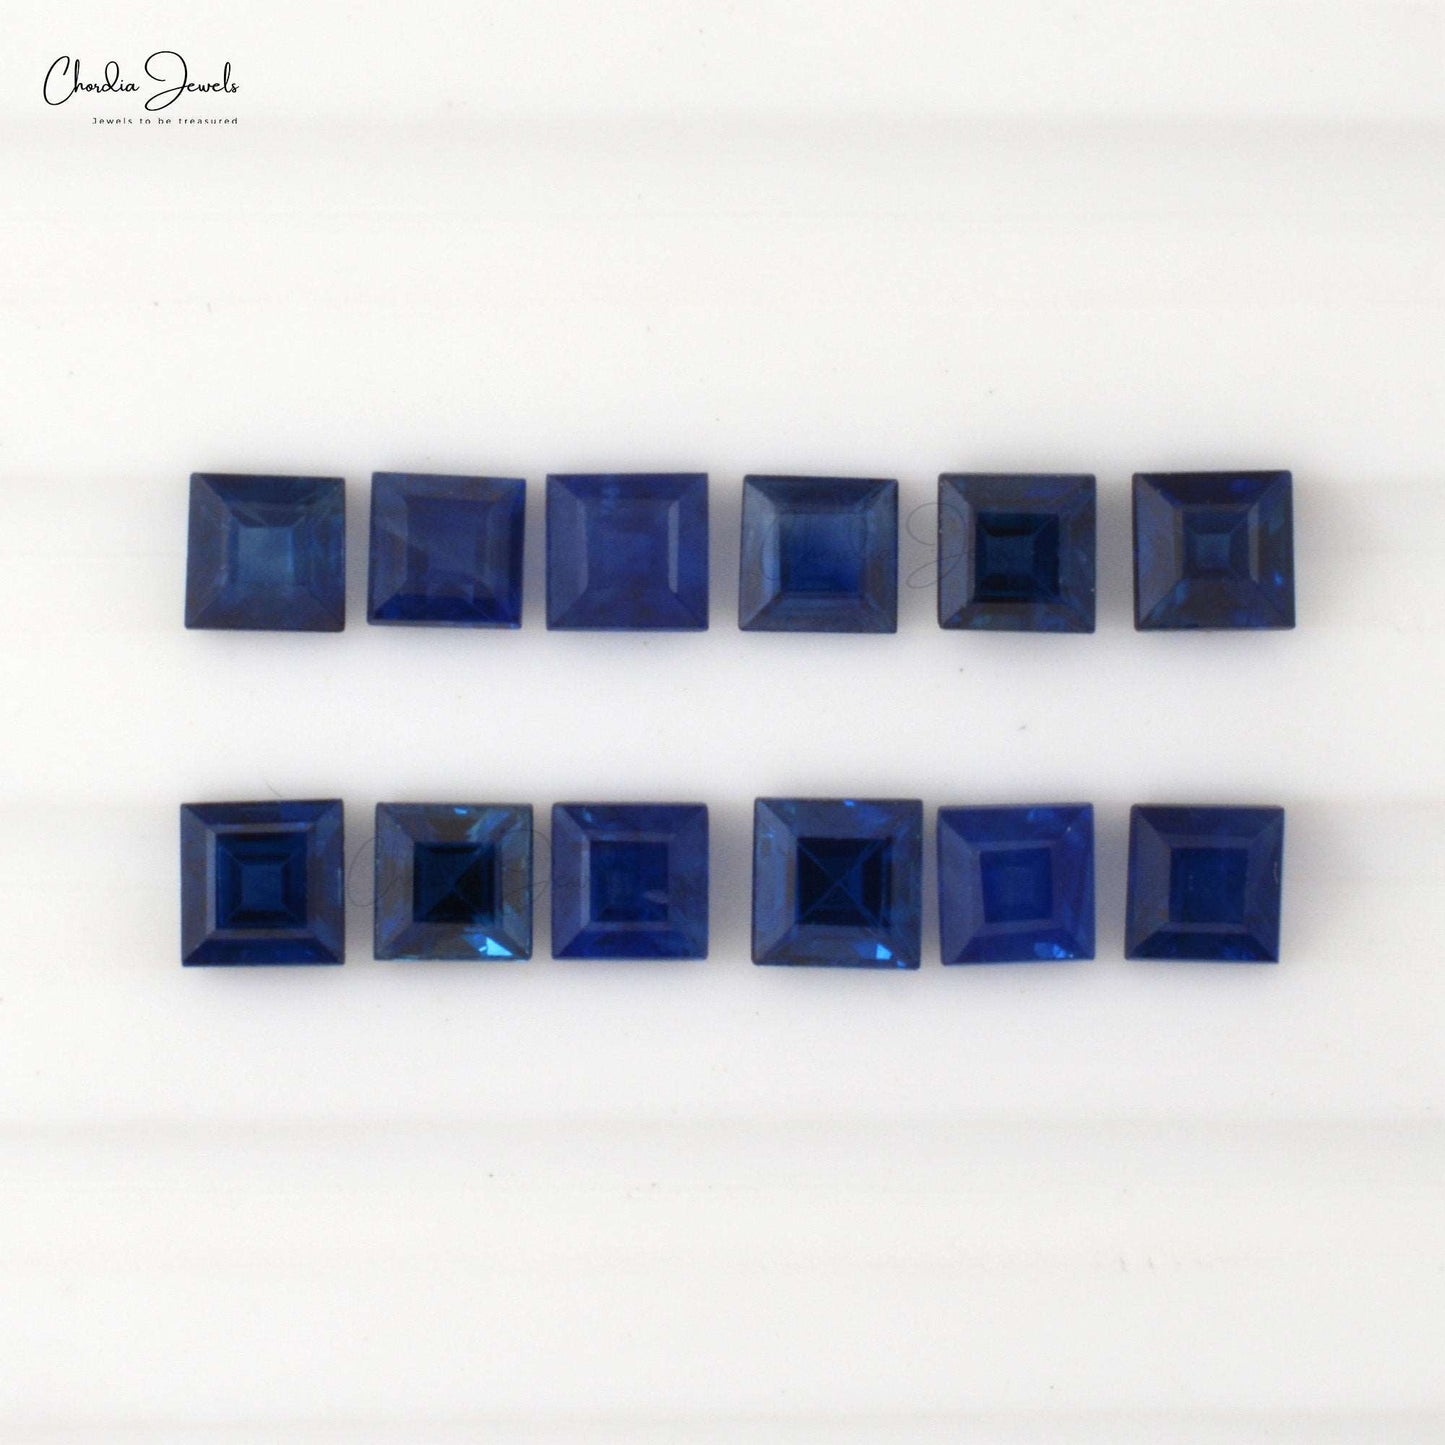 Load image into Gallery viewer, Natural Blue Sapphire Gemstone
